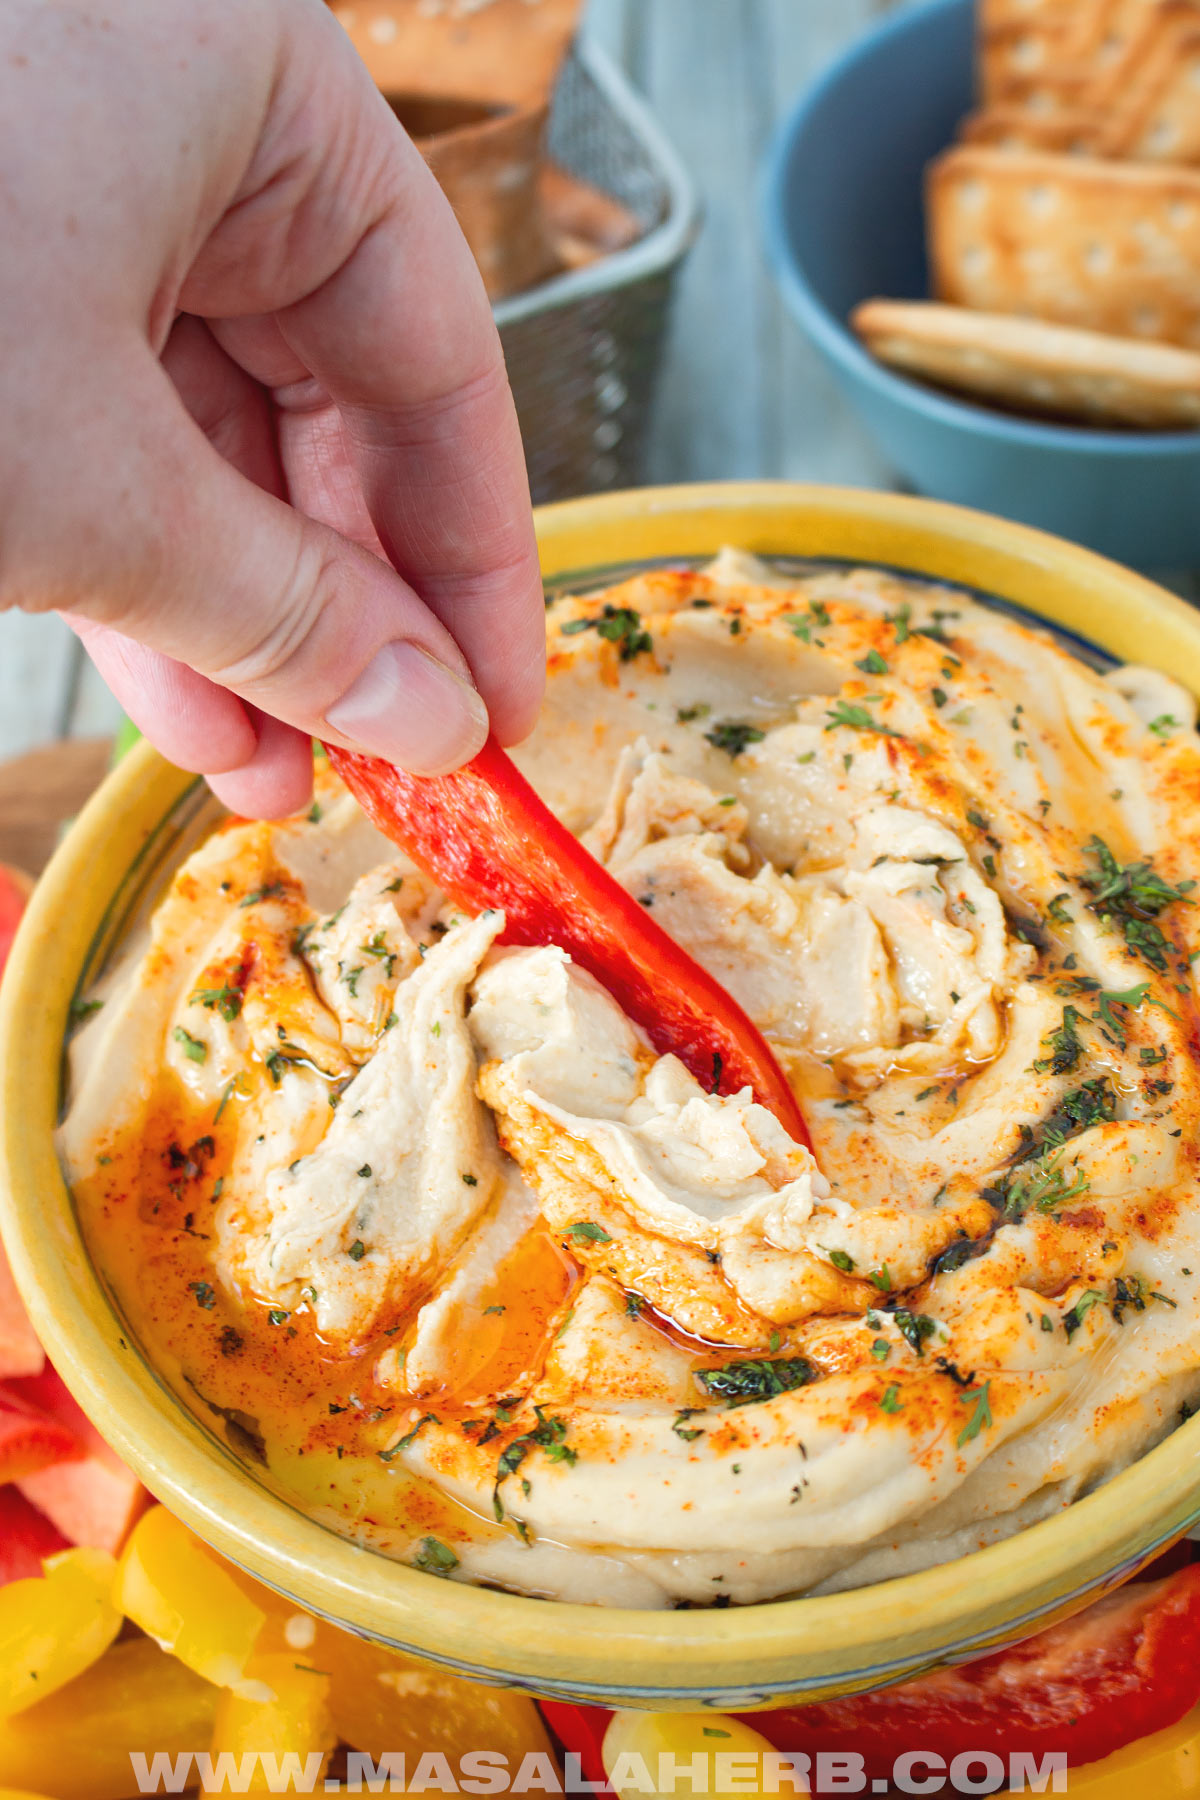 dipping with red bell pepper strip in hummus